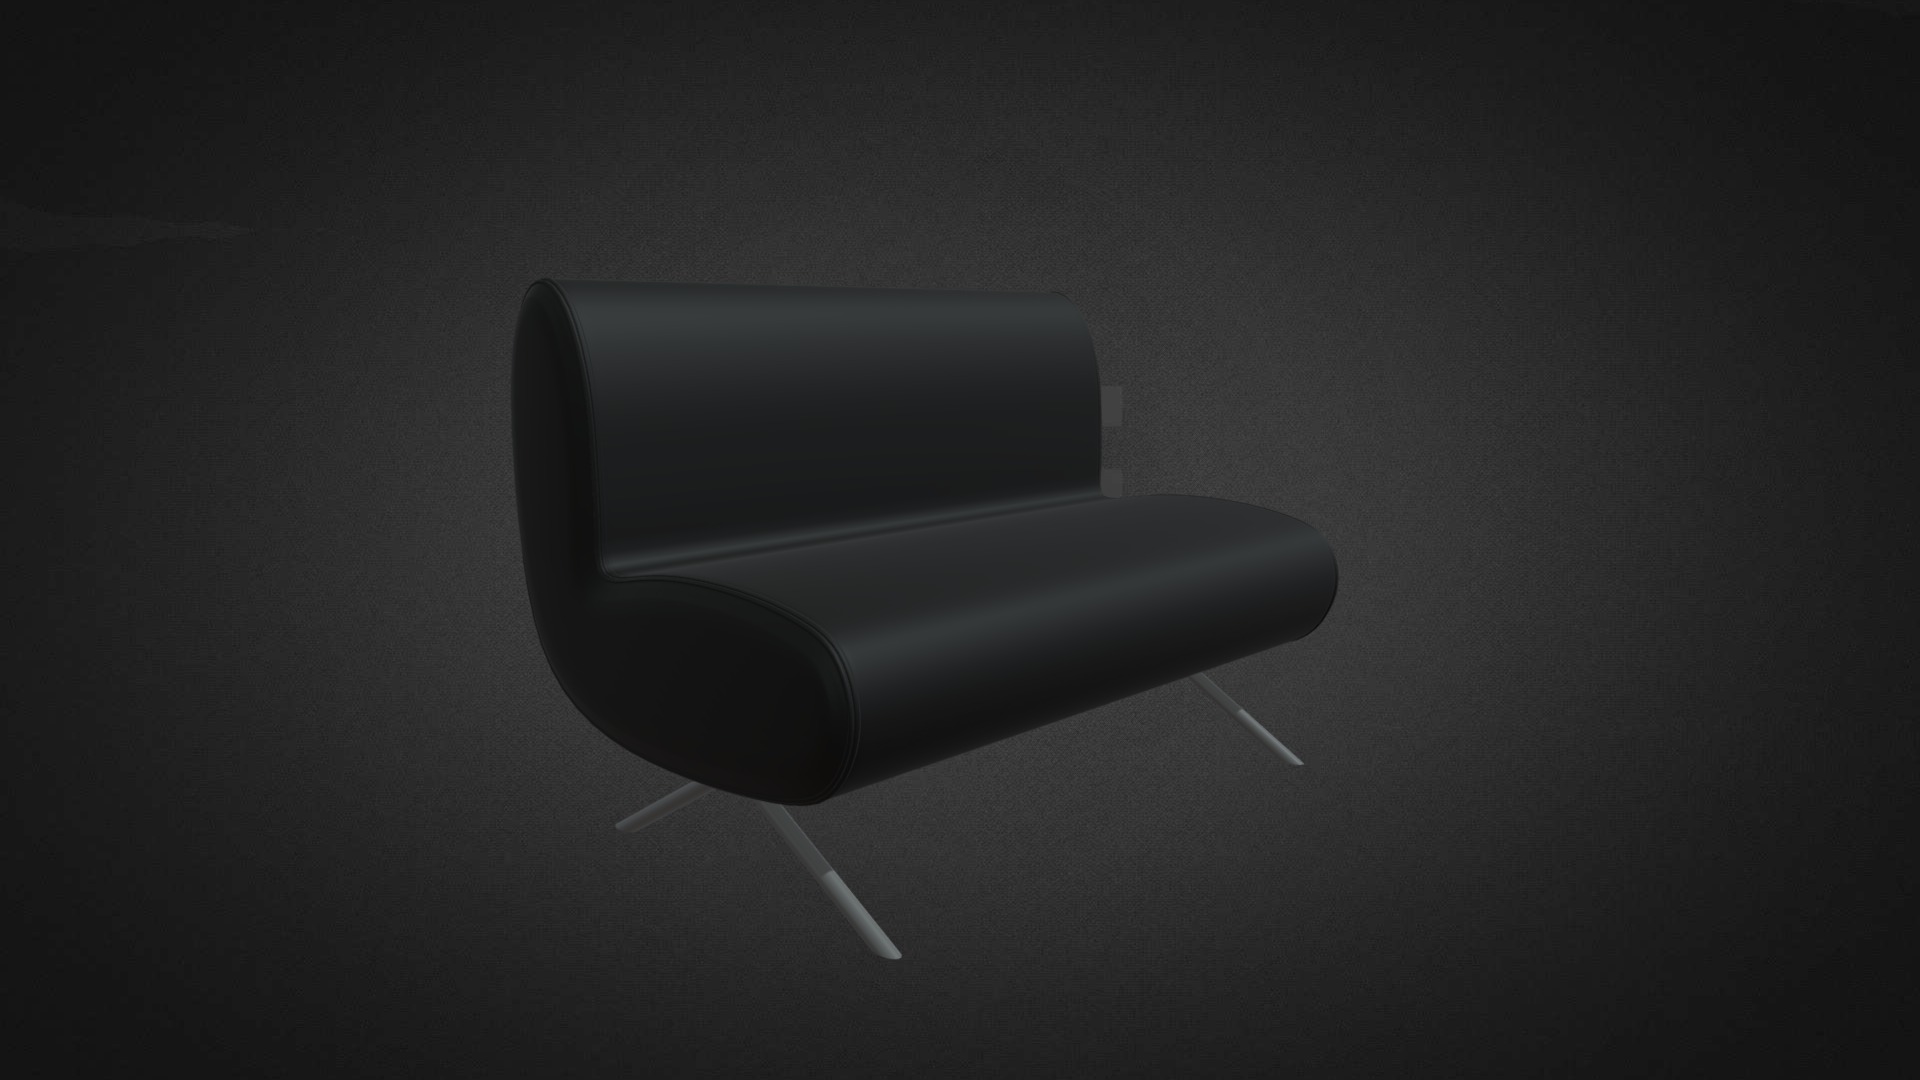 3D model Angel Halo Sofa No Arms Hire - This is a 3D model of the Angel Halo Sofa No Arms Hire. The 3D model is about a black computer mouse.